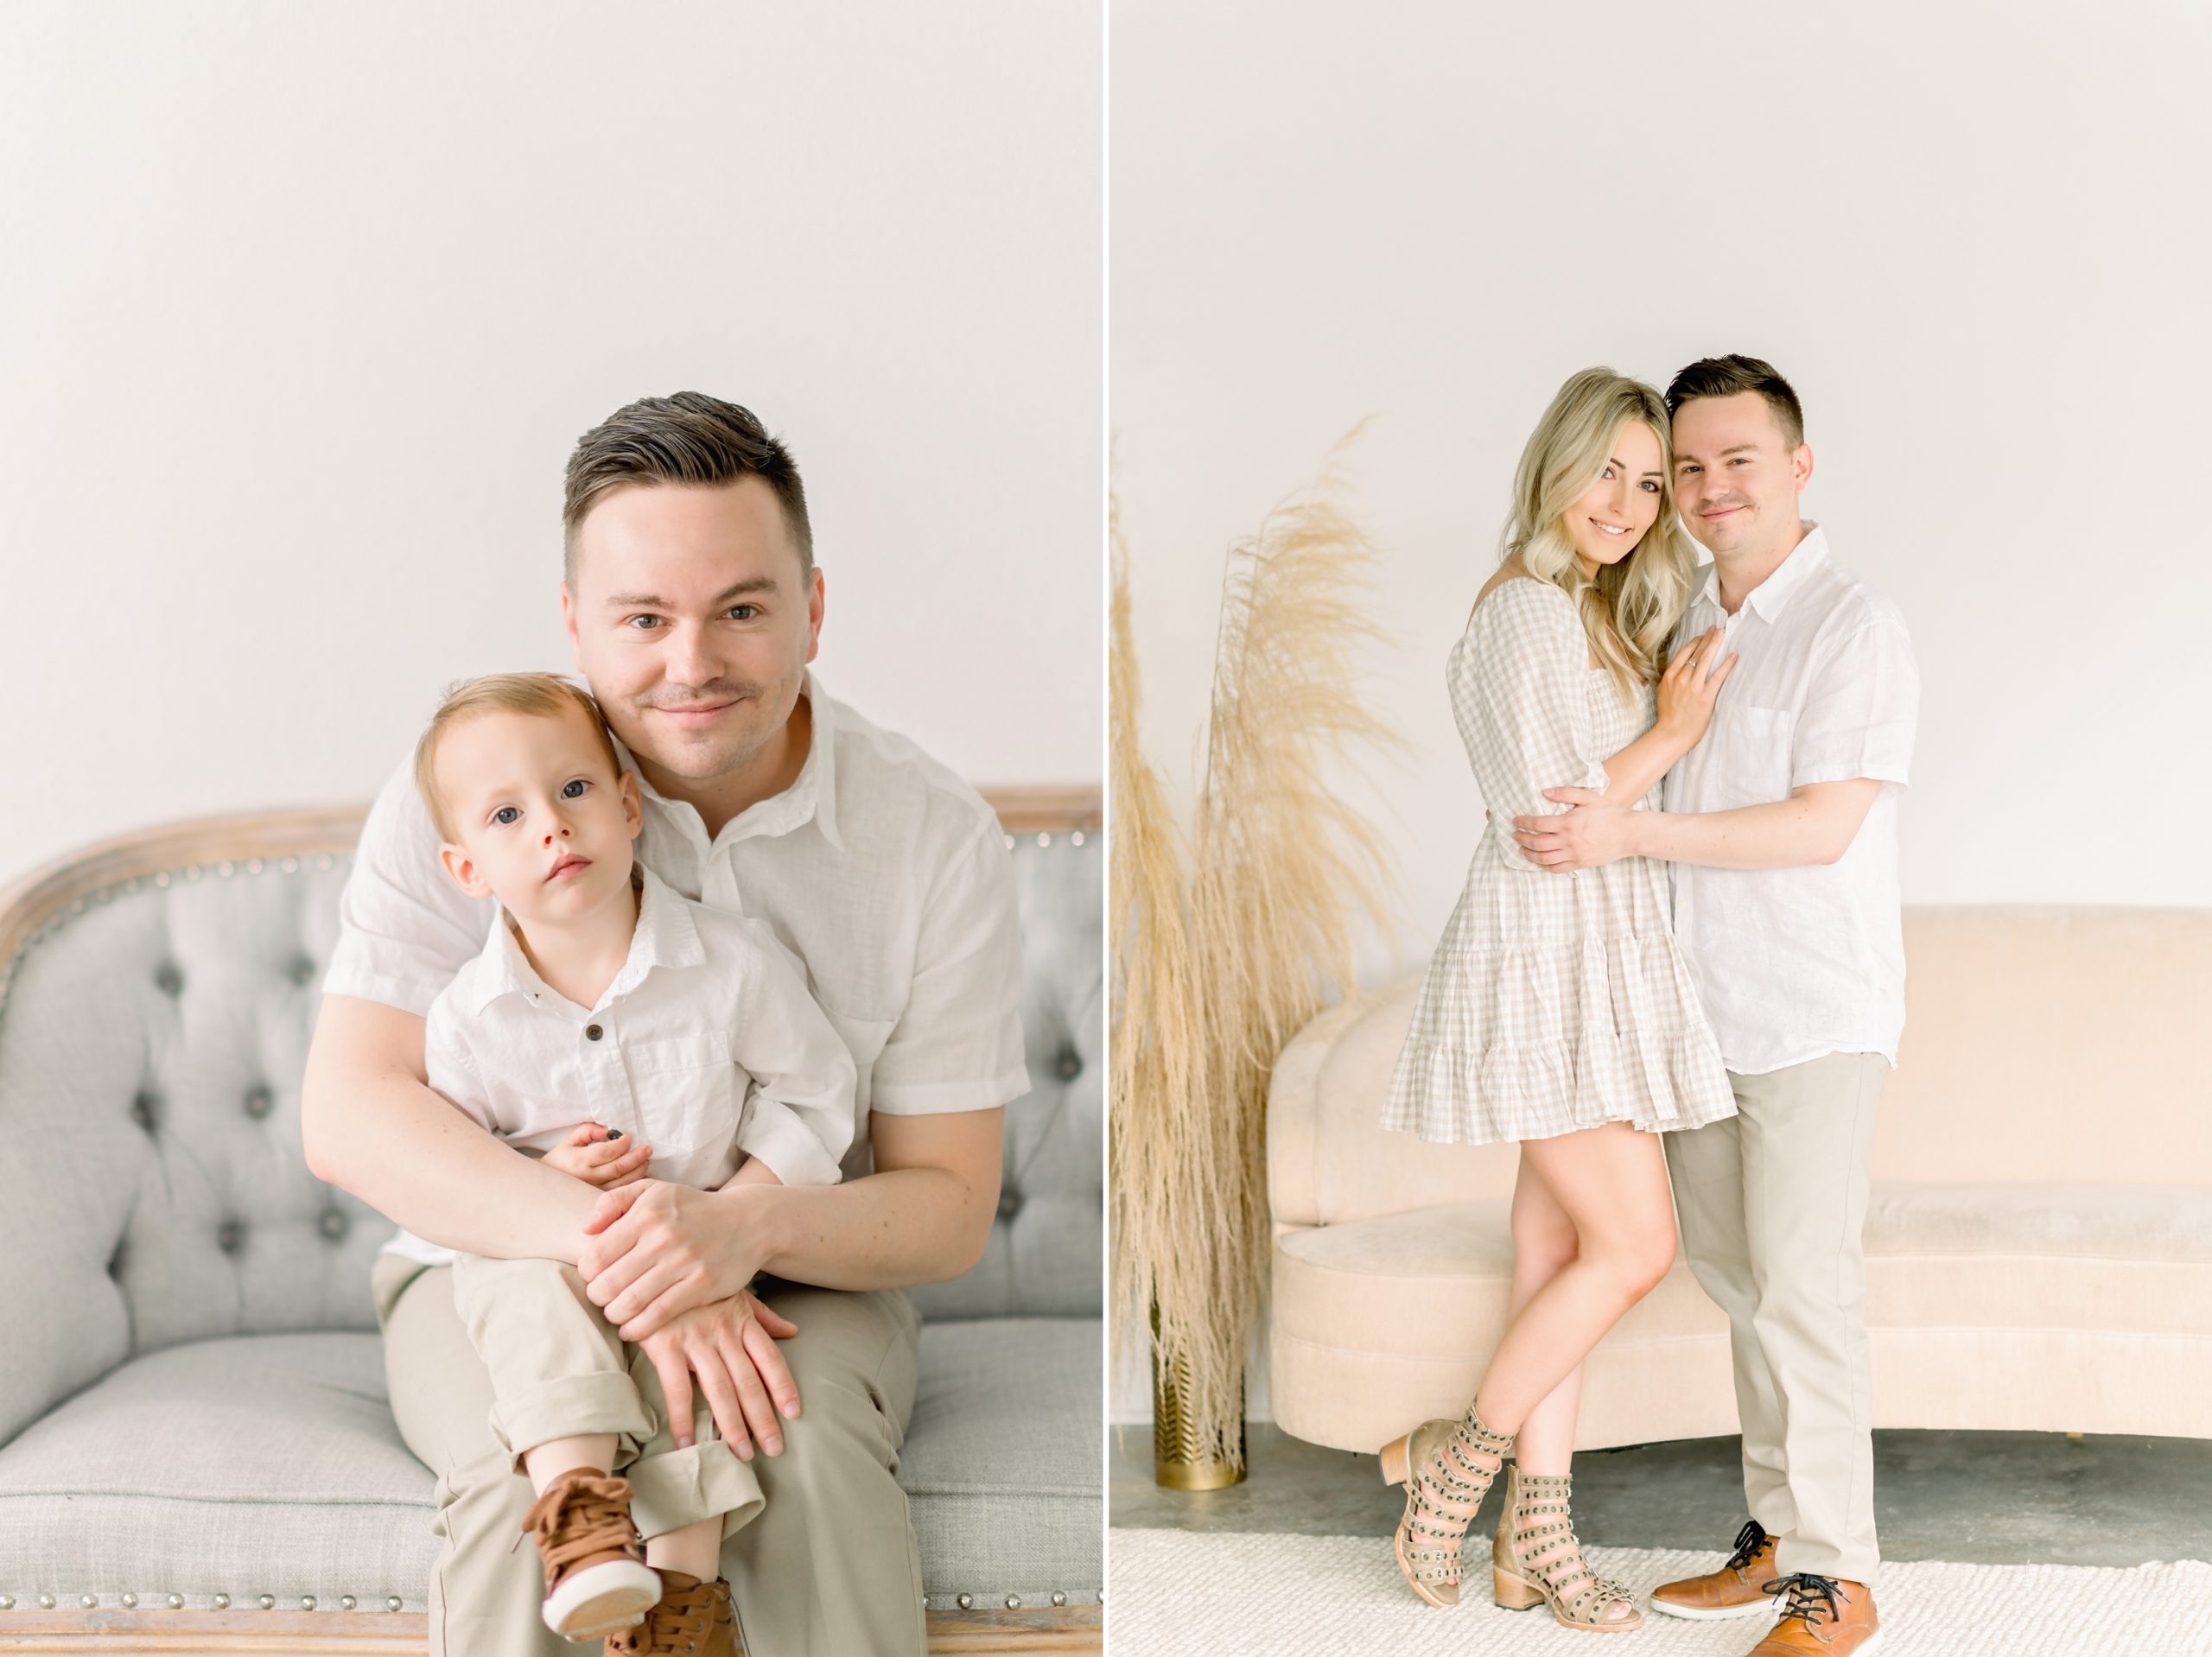 A young family of 3 gets updated family portraits done in a bright white studio in Denver, Colorado.